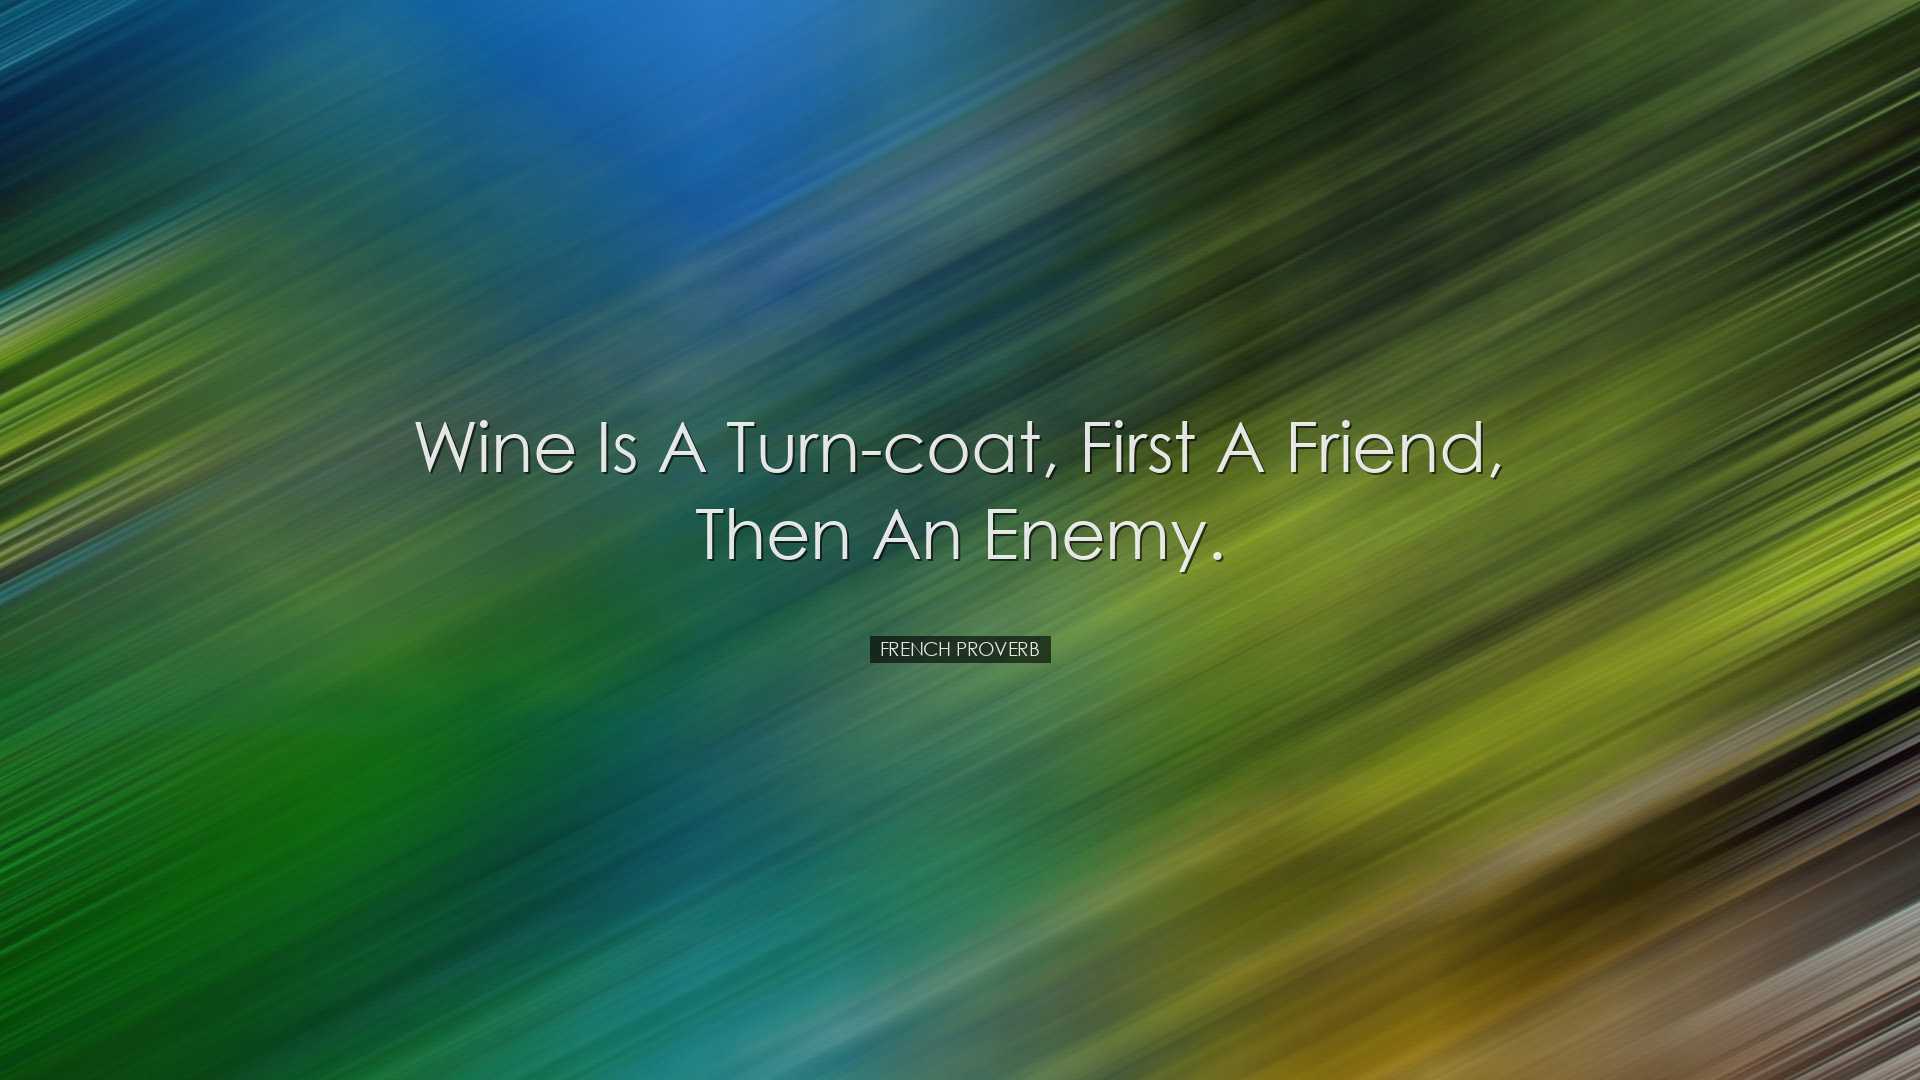 Wine is a turn-coat, first a friend, then an enemy. - French prove